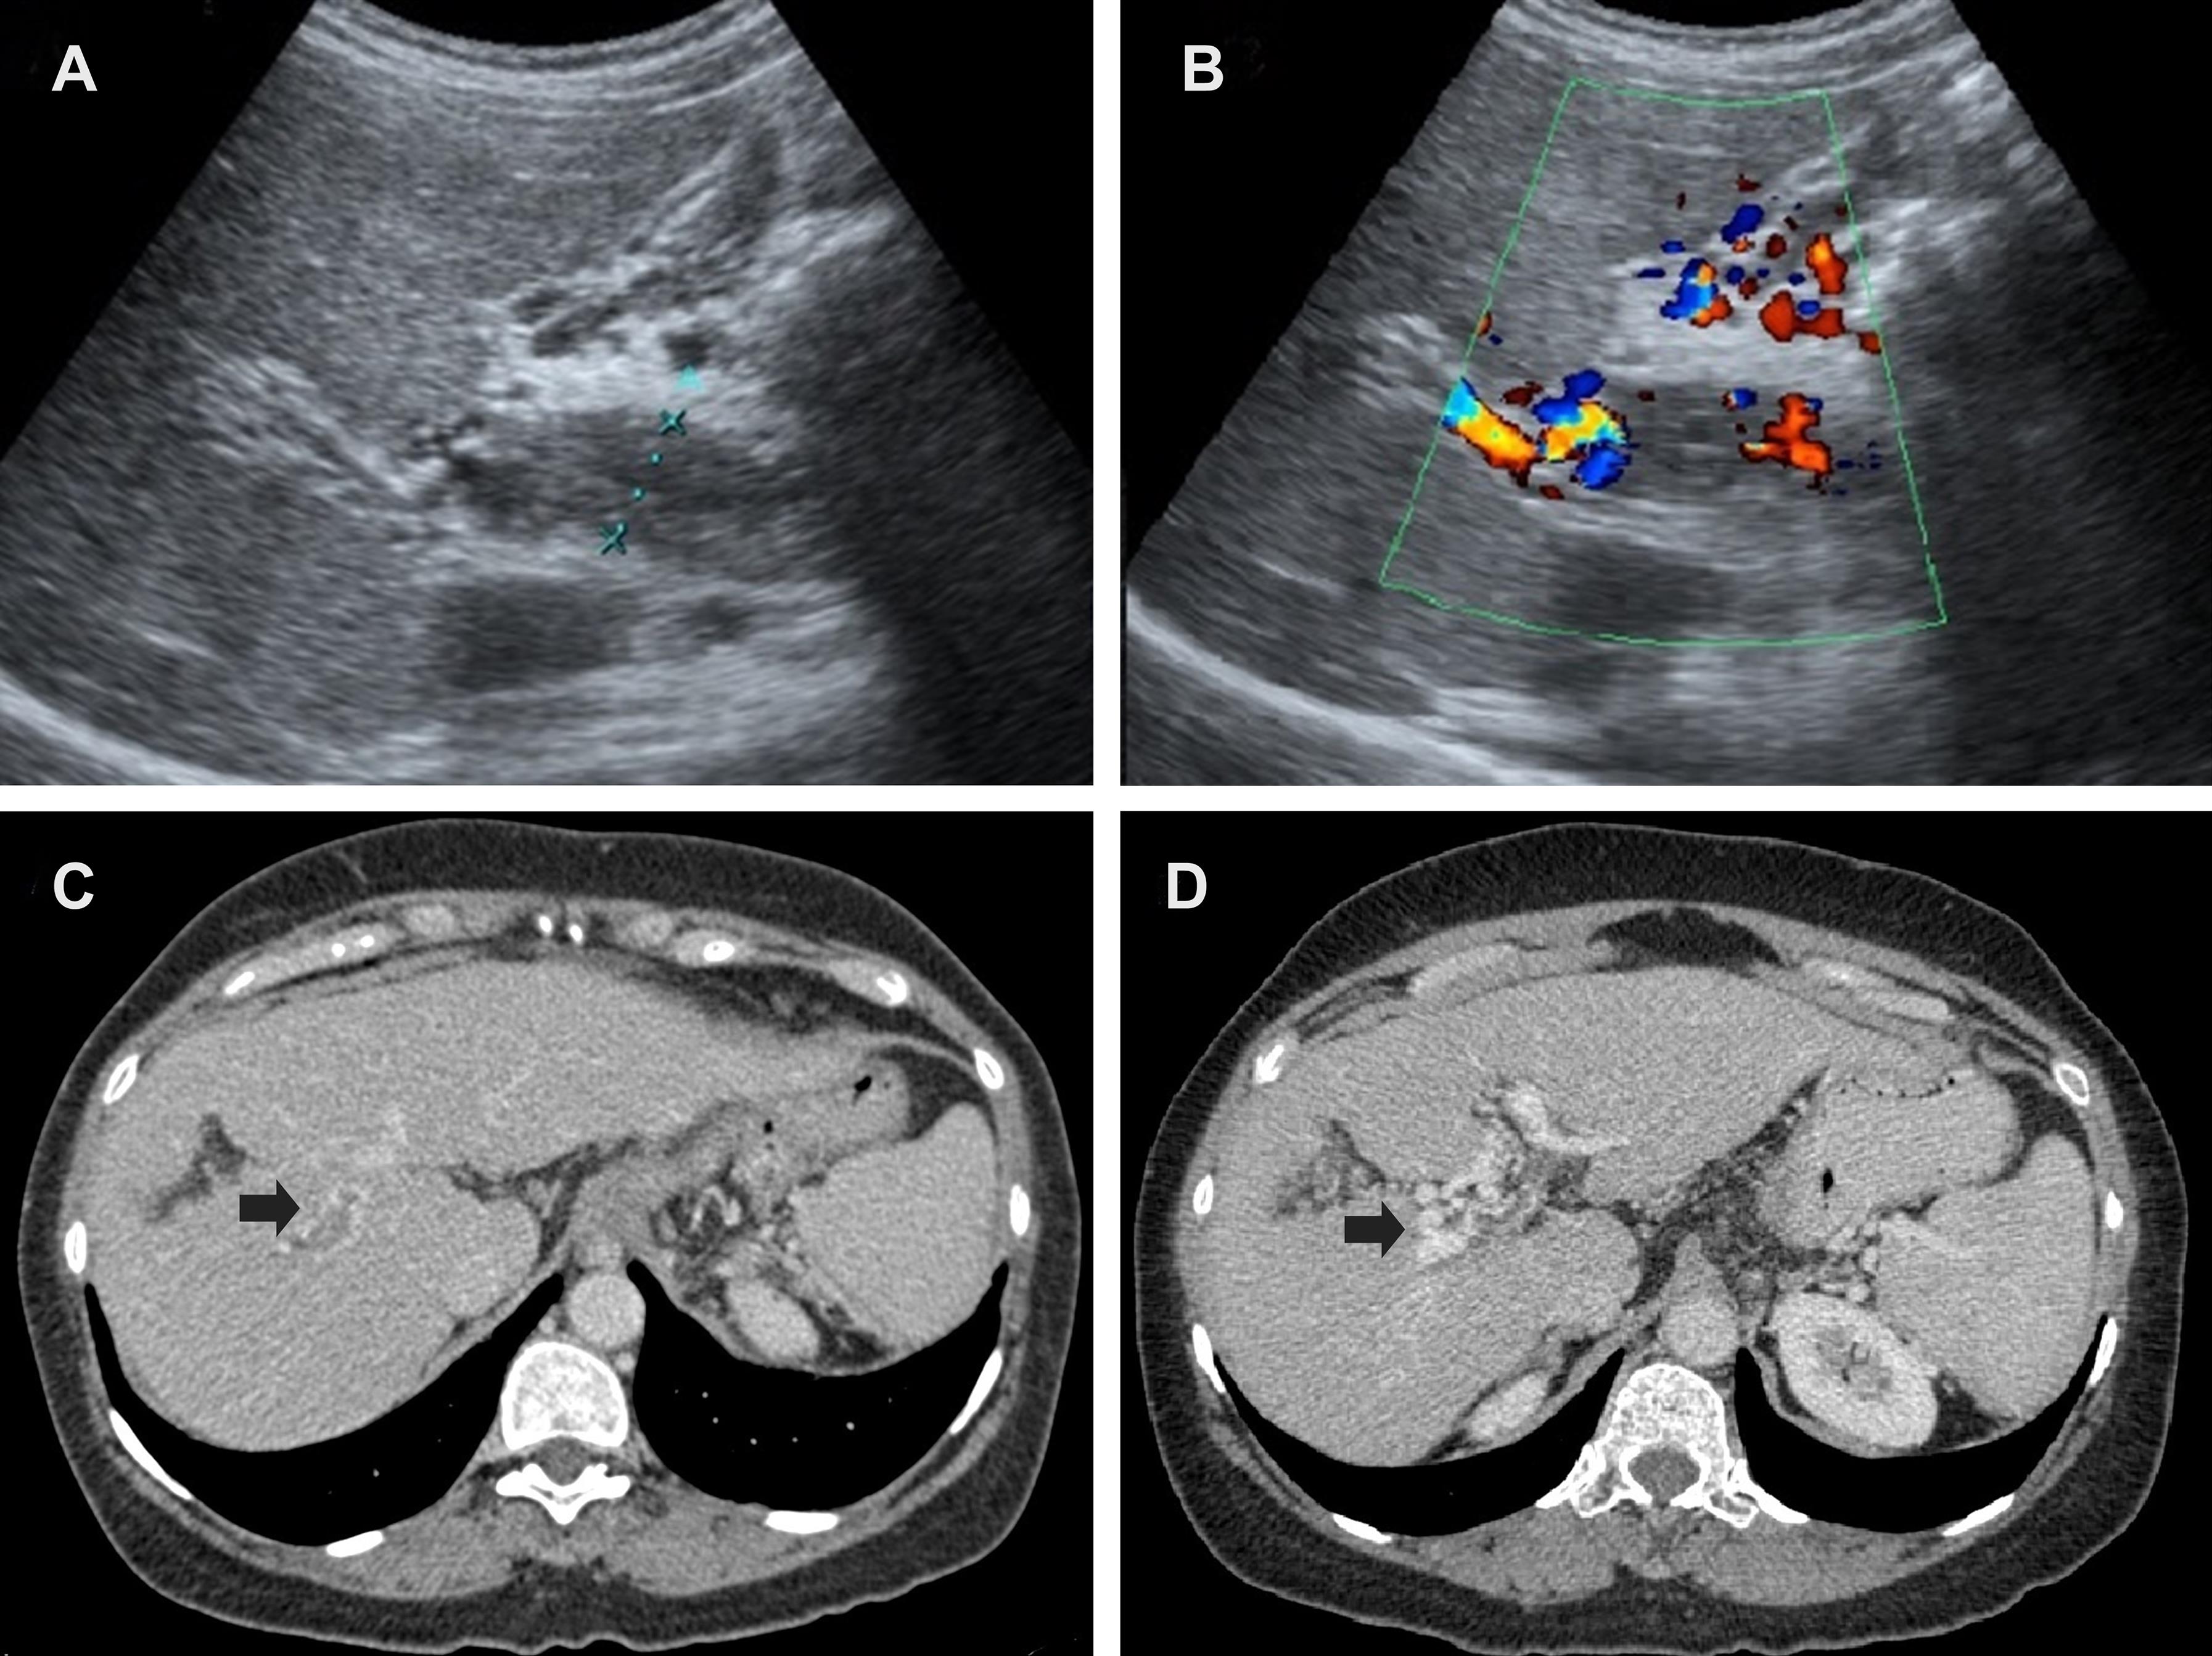 <bold>Imaging findings of nontumoral portal vein thrombosis (PVT) in liver cirrhosis.</bold> (A) Ultrasound of the abdomen shows an echogenic material within the dilated portal vein, indicating PVT. (B) Doppler ultrasound of the abdomen shows decreased color flow within the main portal vein and demonstrates color-filled dilated collateral vessels around the porta hepatis consistent with cavernous transformation. (C) Computed tomography of the abdomen on portal venous phase shows a filling defect in the right branch of the portal vein (arrow), indicating thrombus. (D) Contrast-enhanced computed tomography depicts cavernous transformation (arrow) following portal venous thrombosis.